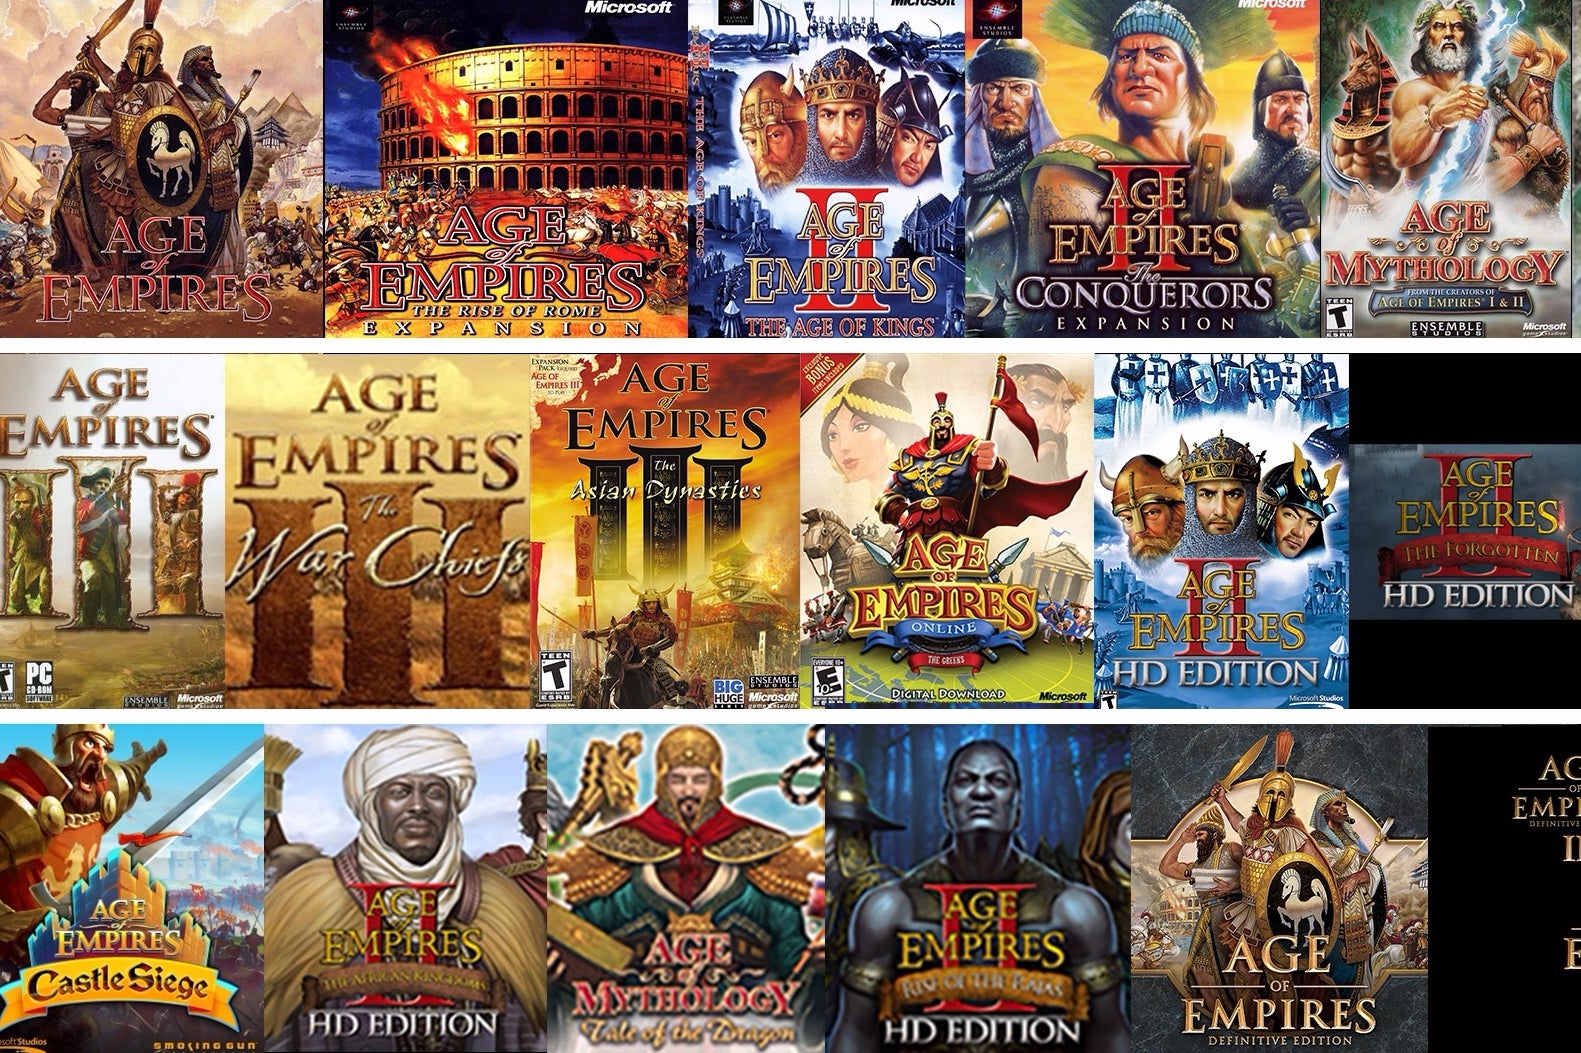 Image for Odklad Age of Empires Definitive edice